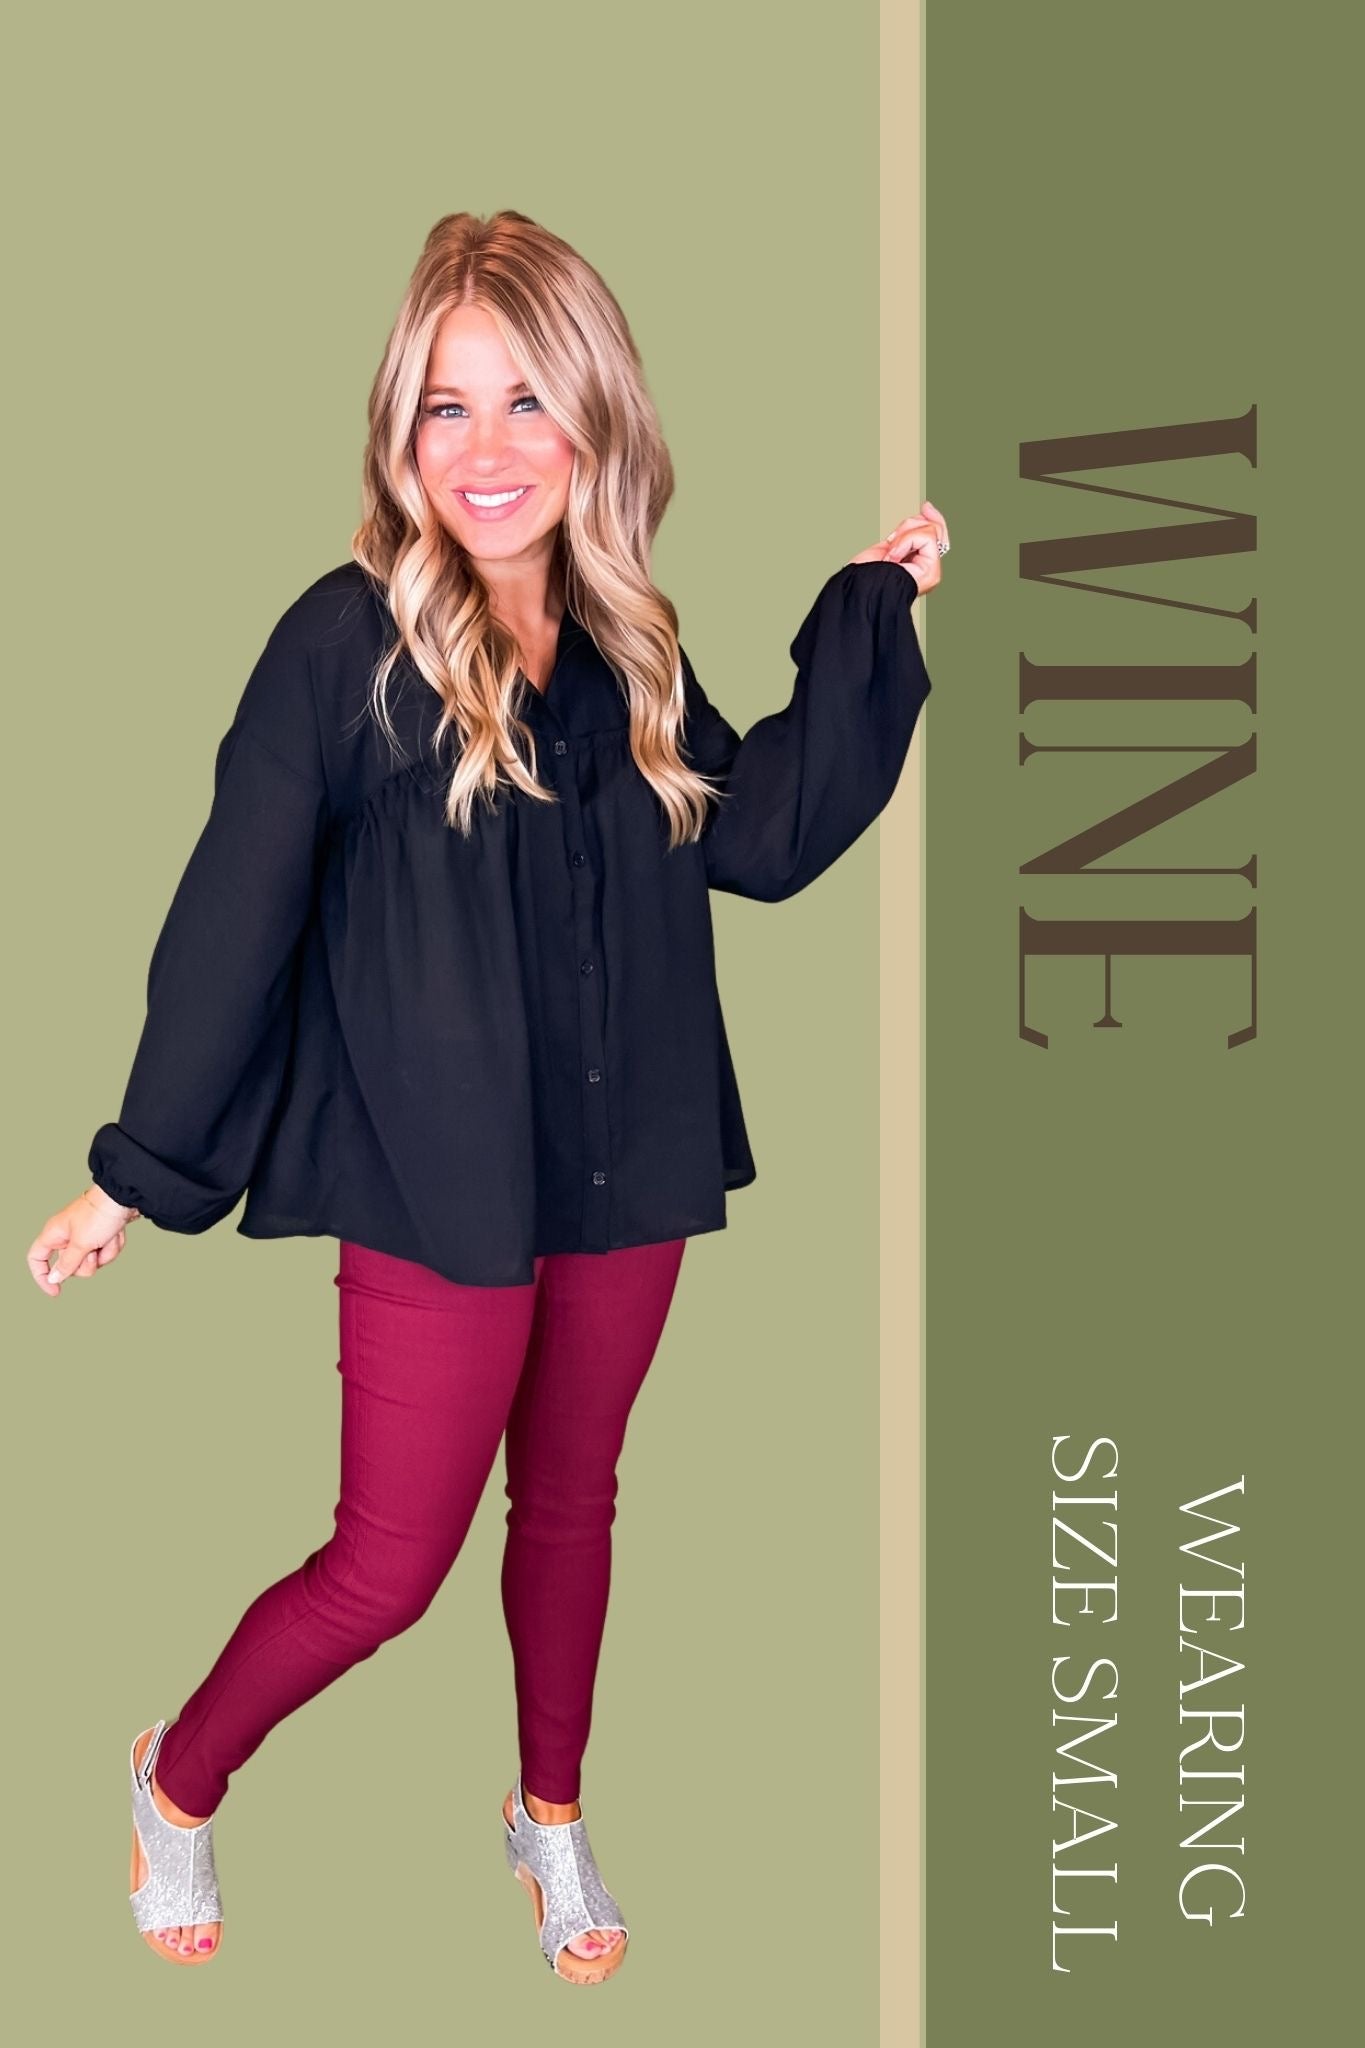 Welcome YMI Jeans! Here's your 20% Off - YMI Jeans